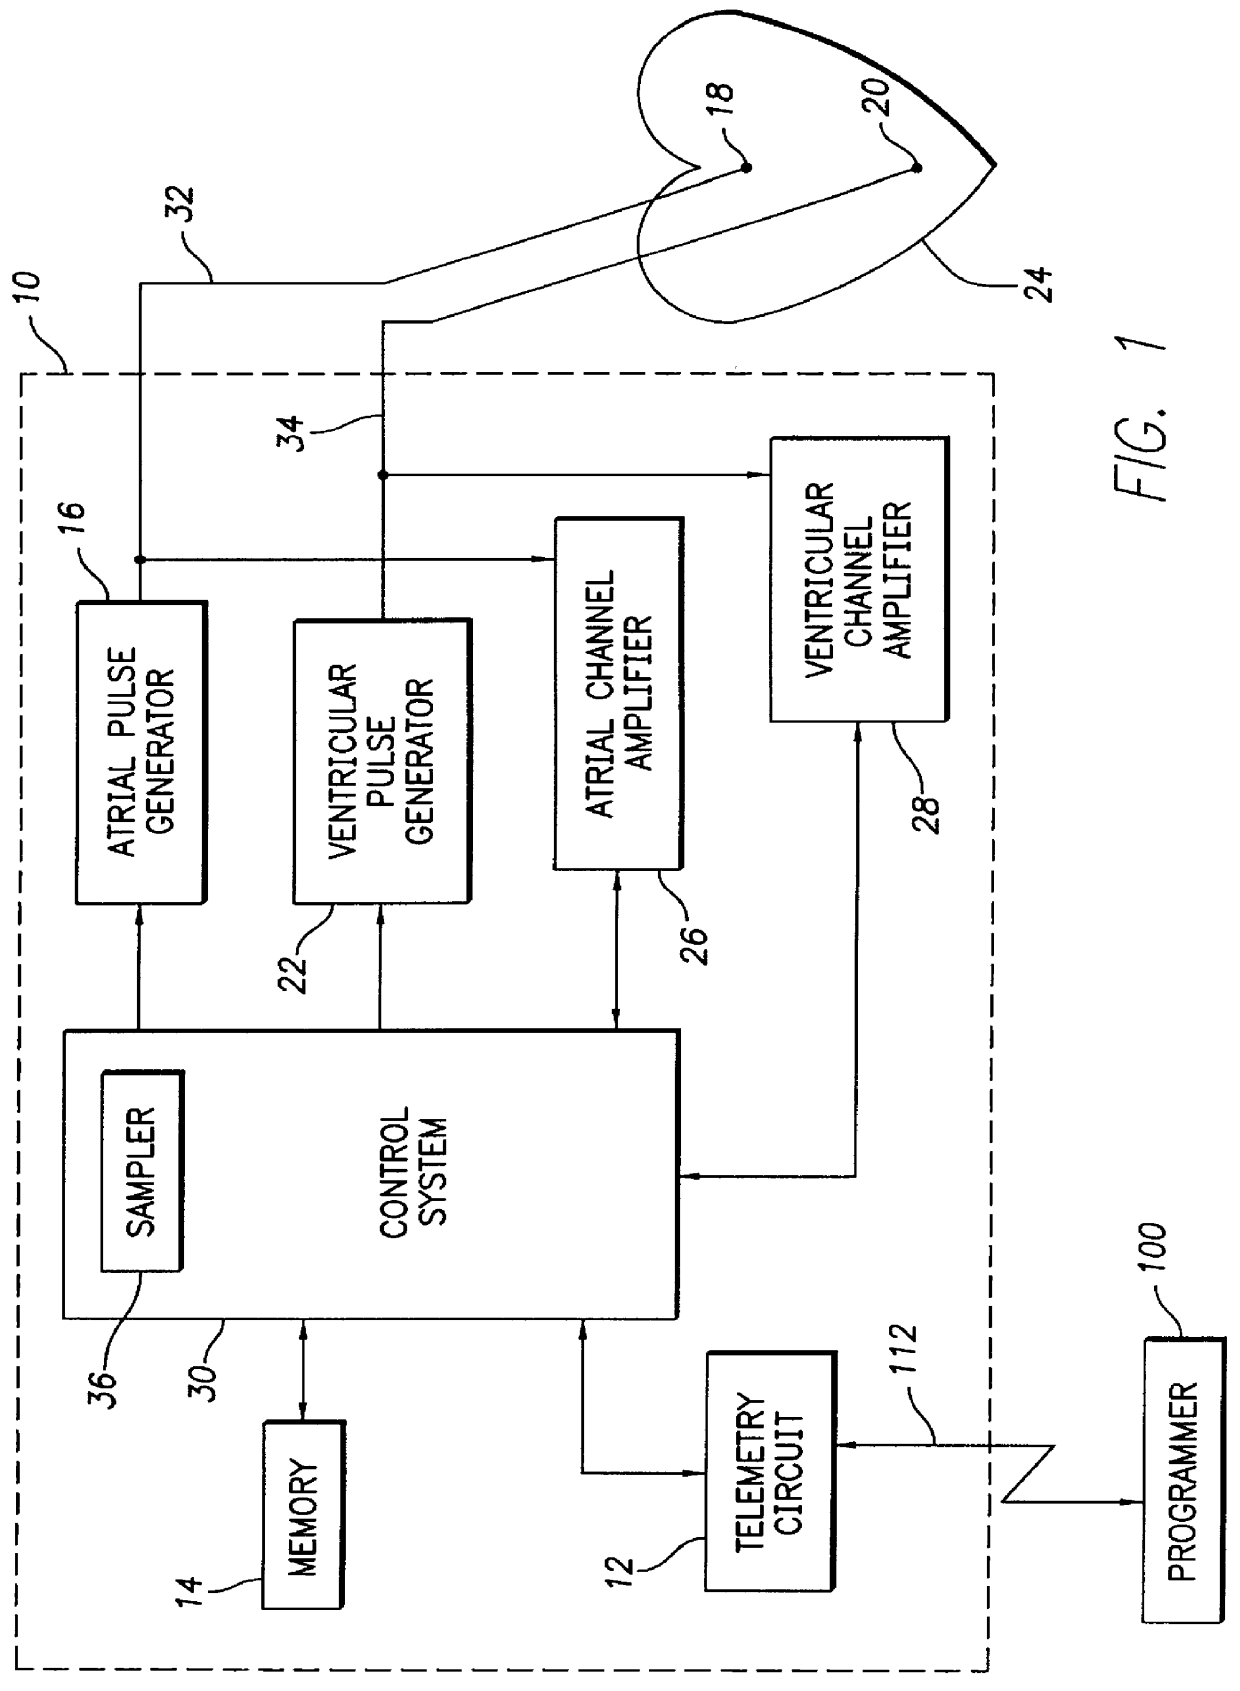 System and method for atrial autocapture in single-chamber pacemaker modes using far-field detection